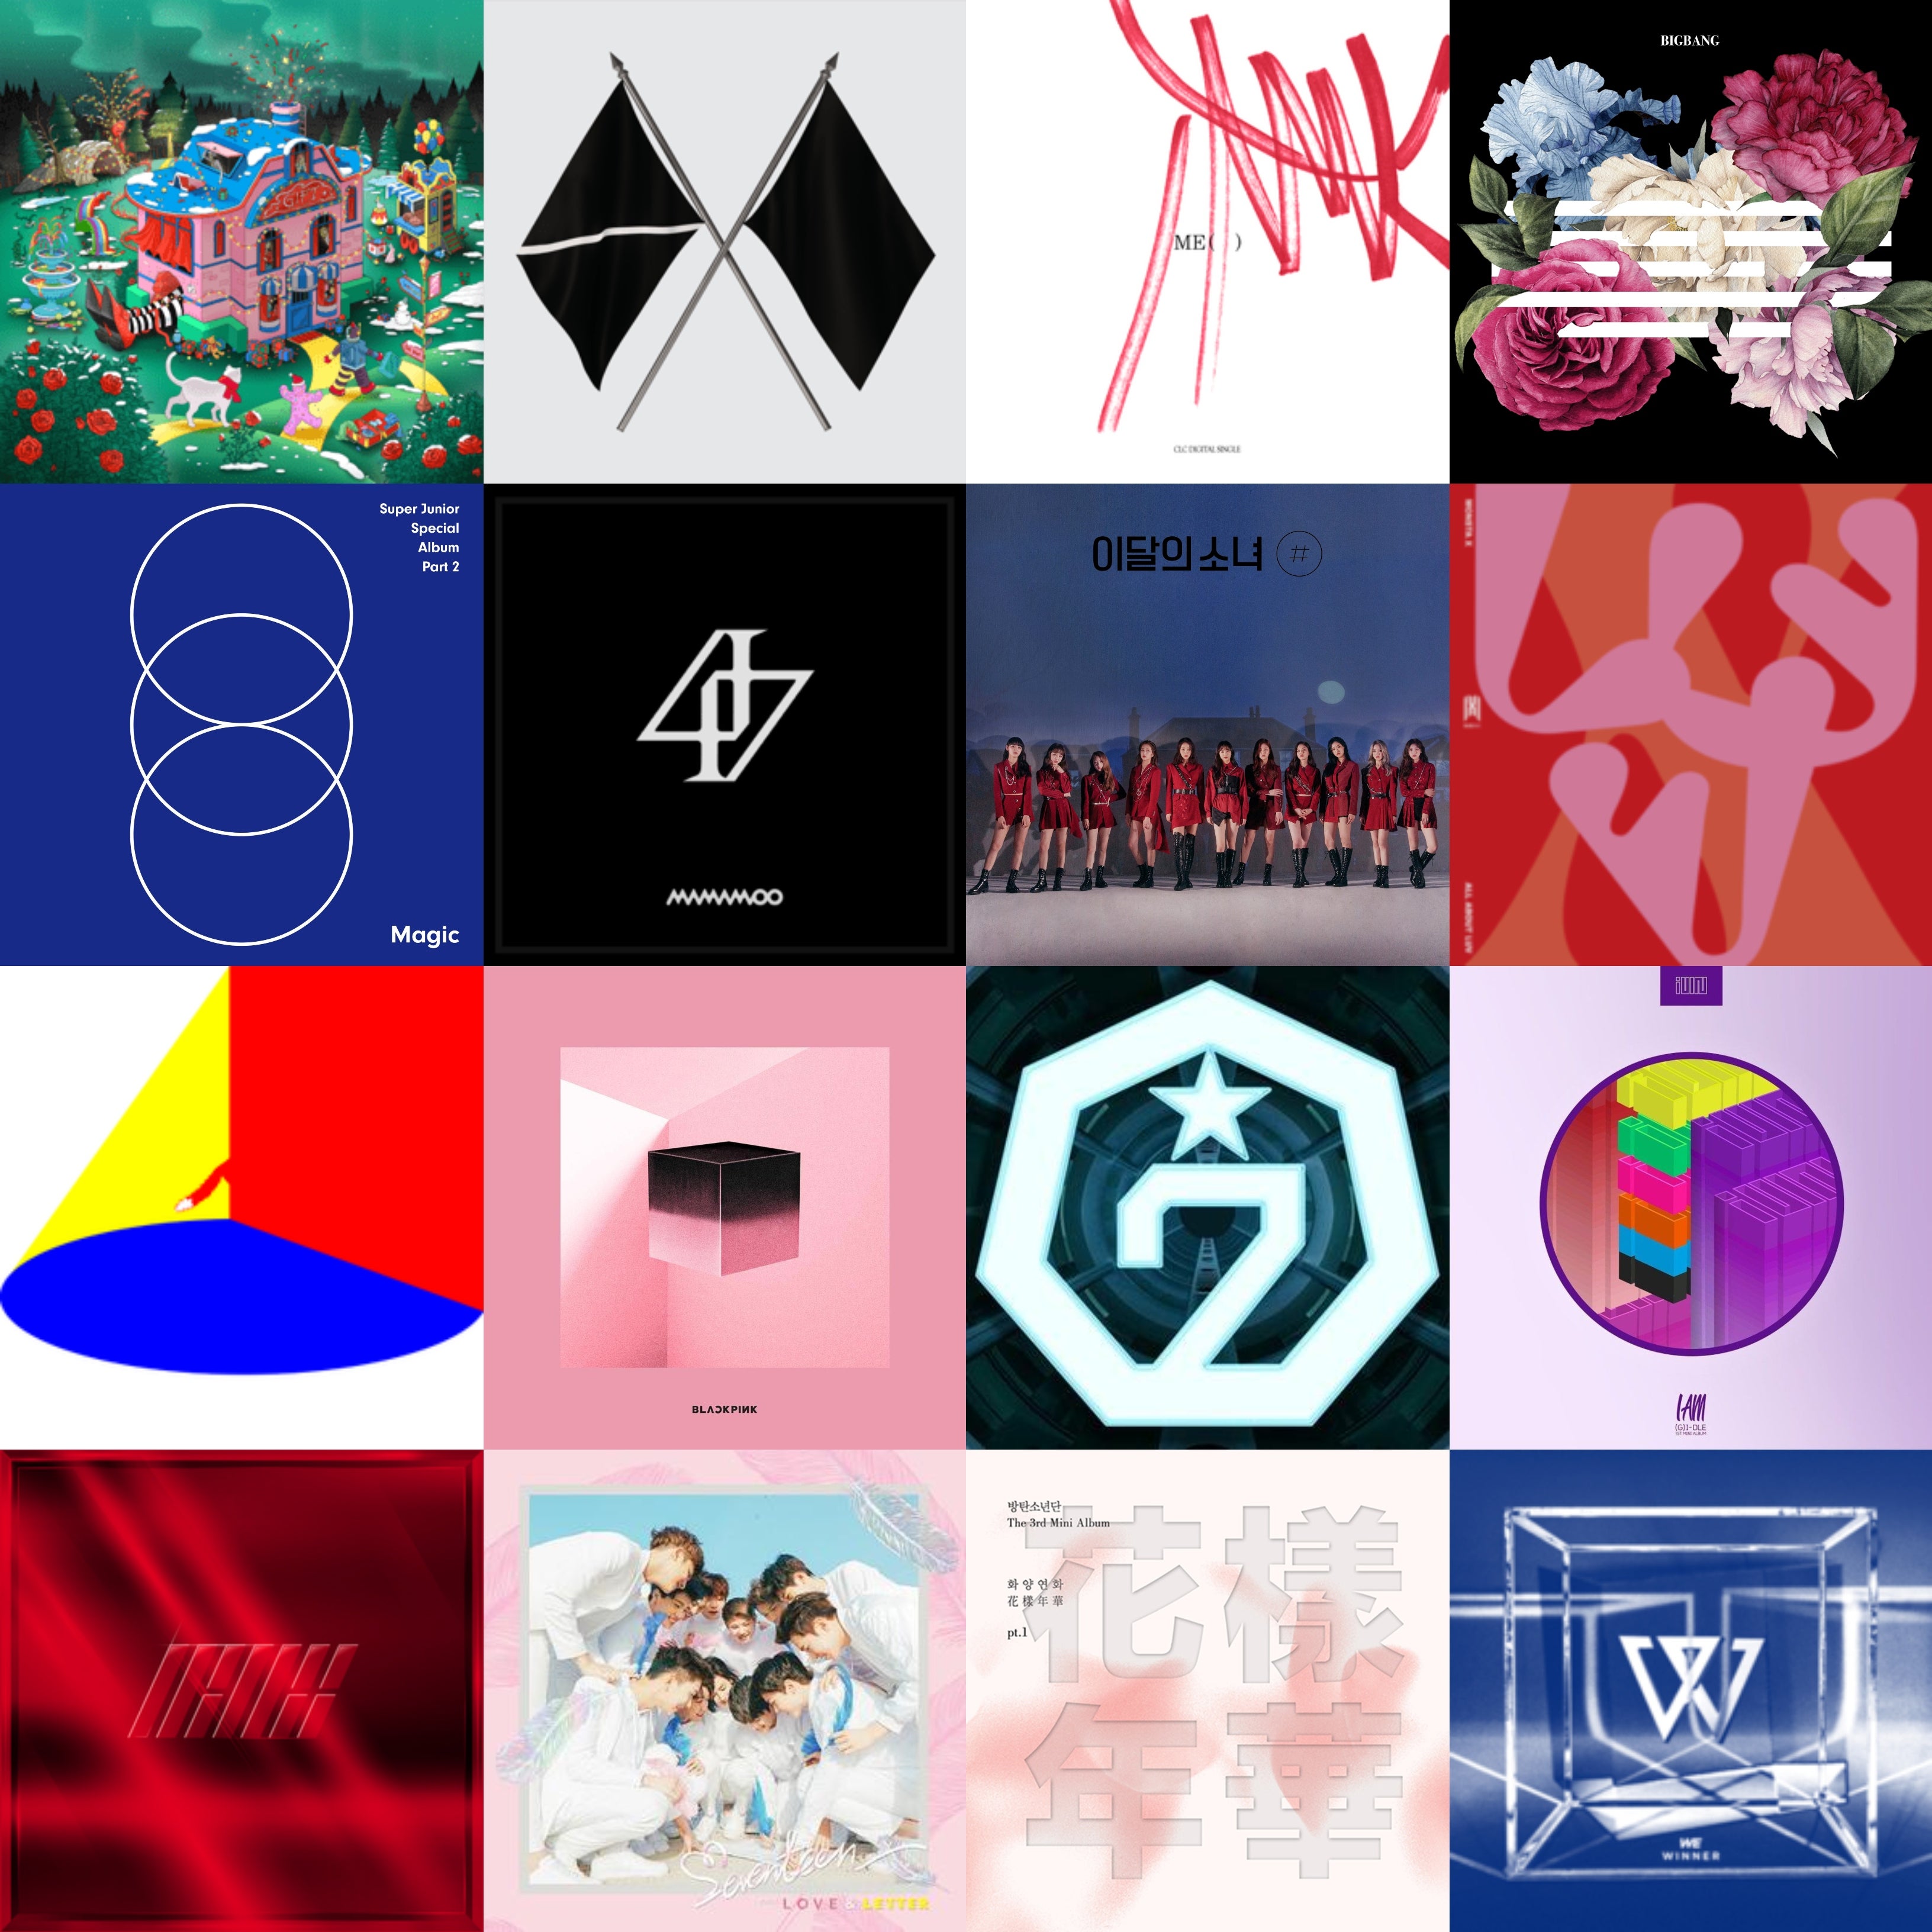 Quiz: What Are The Names Of These 20 K-Pop Albums?, album kpop